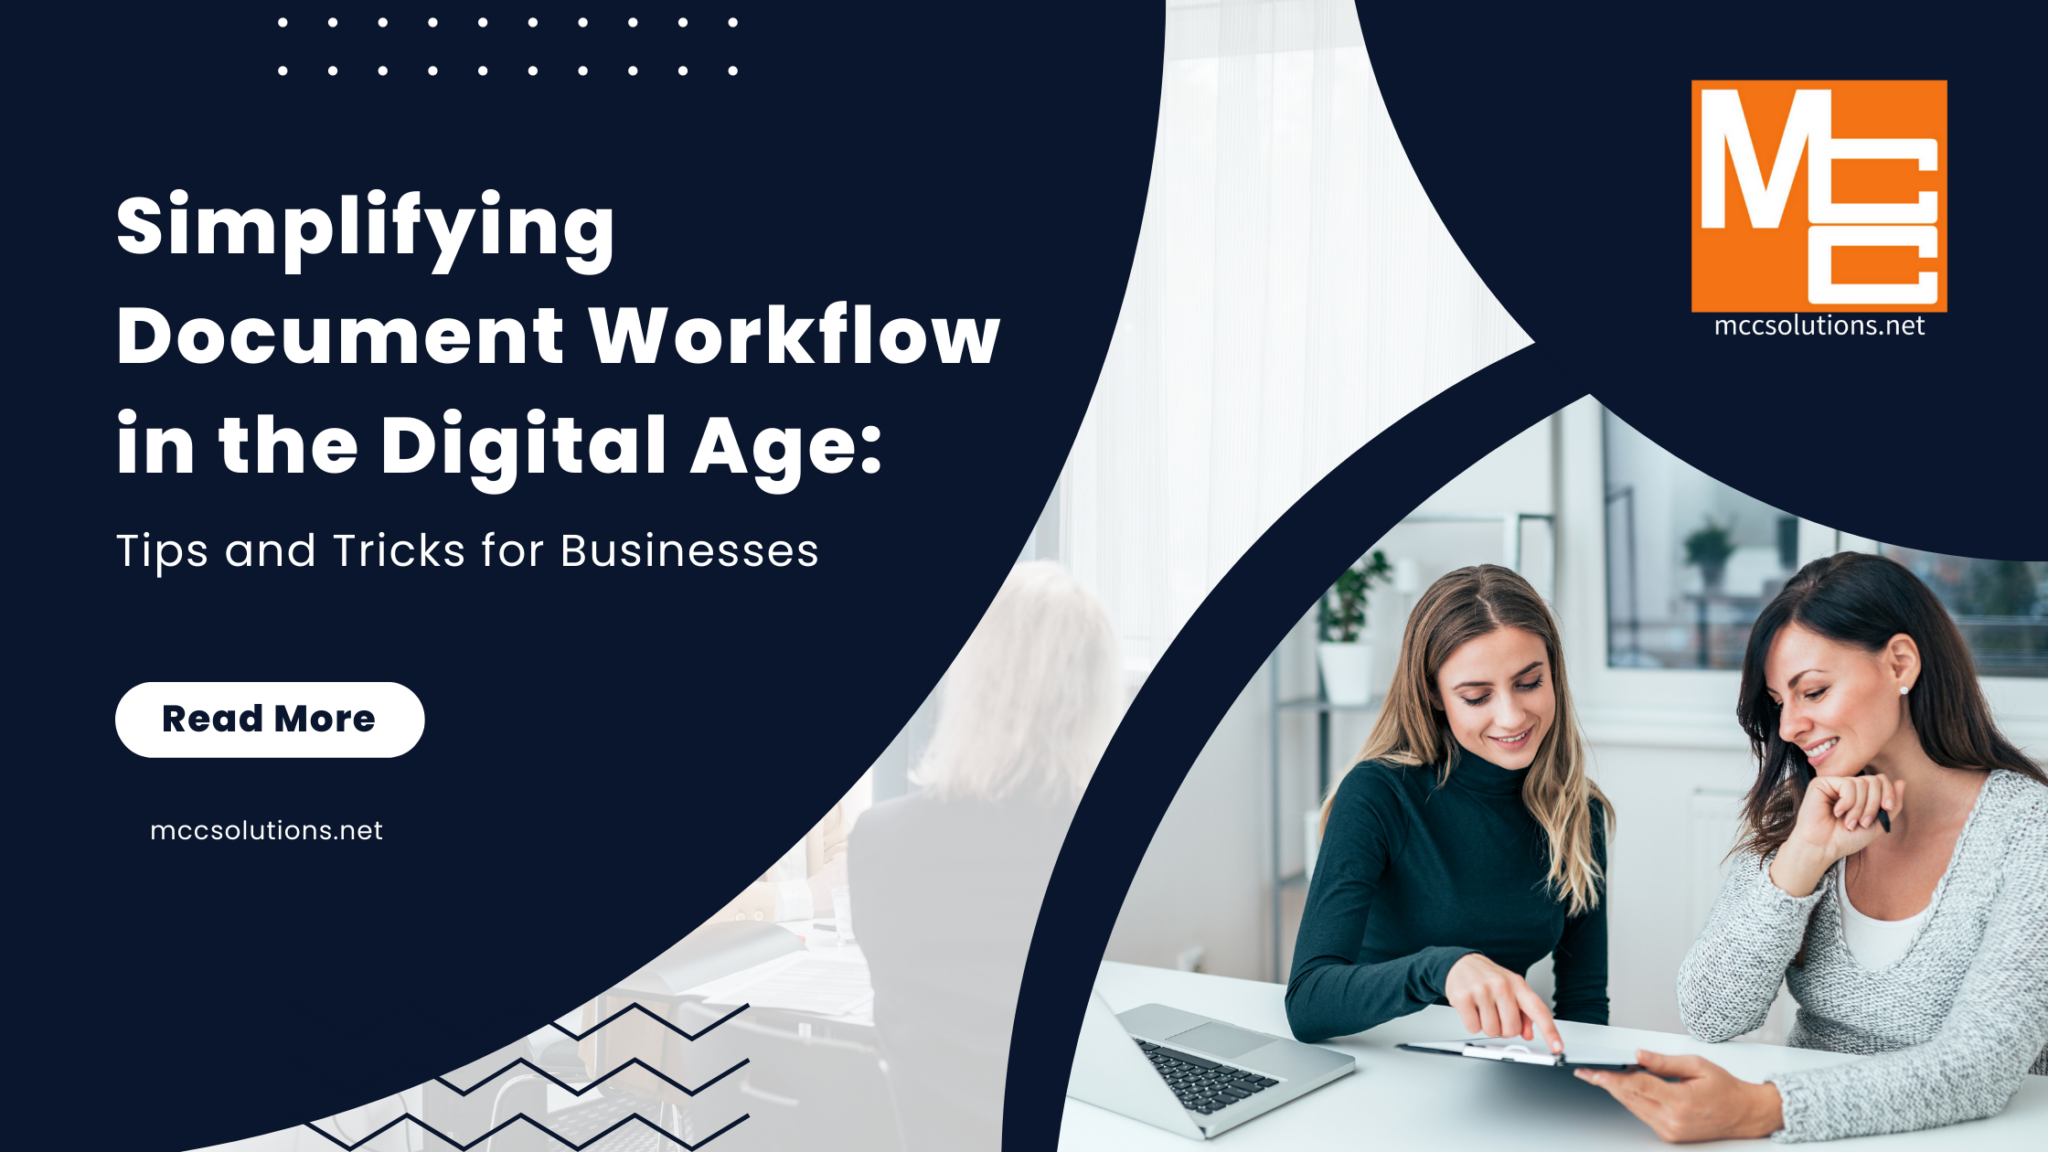 Simplify Document Workflow in the Digital Age